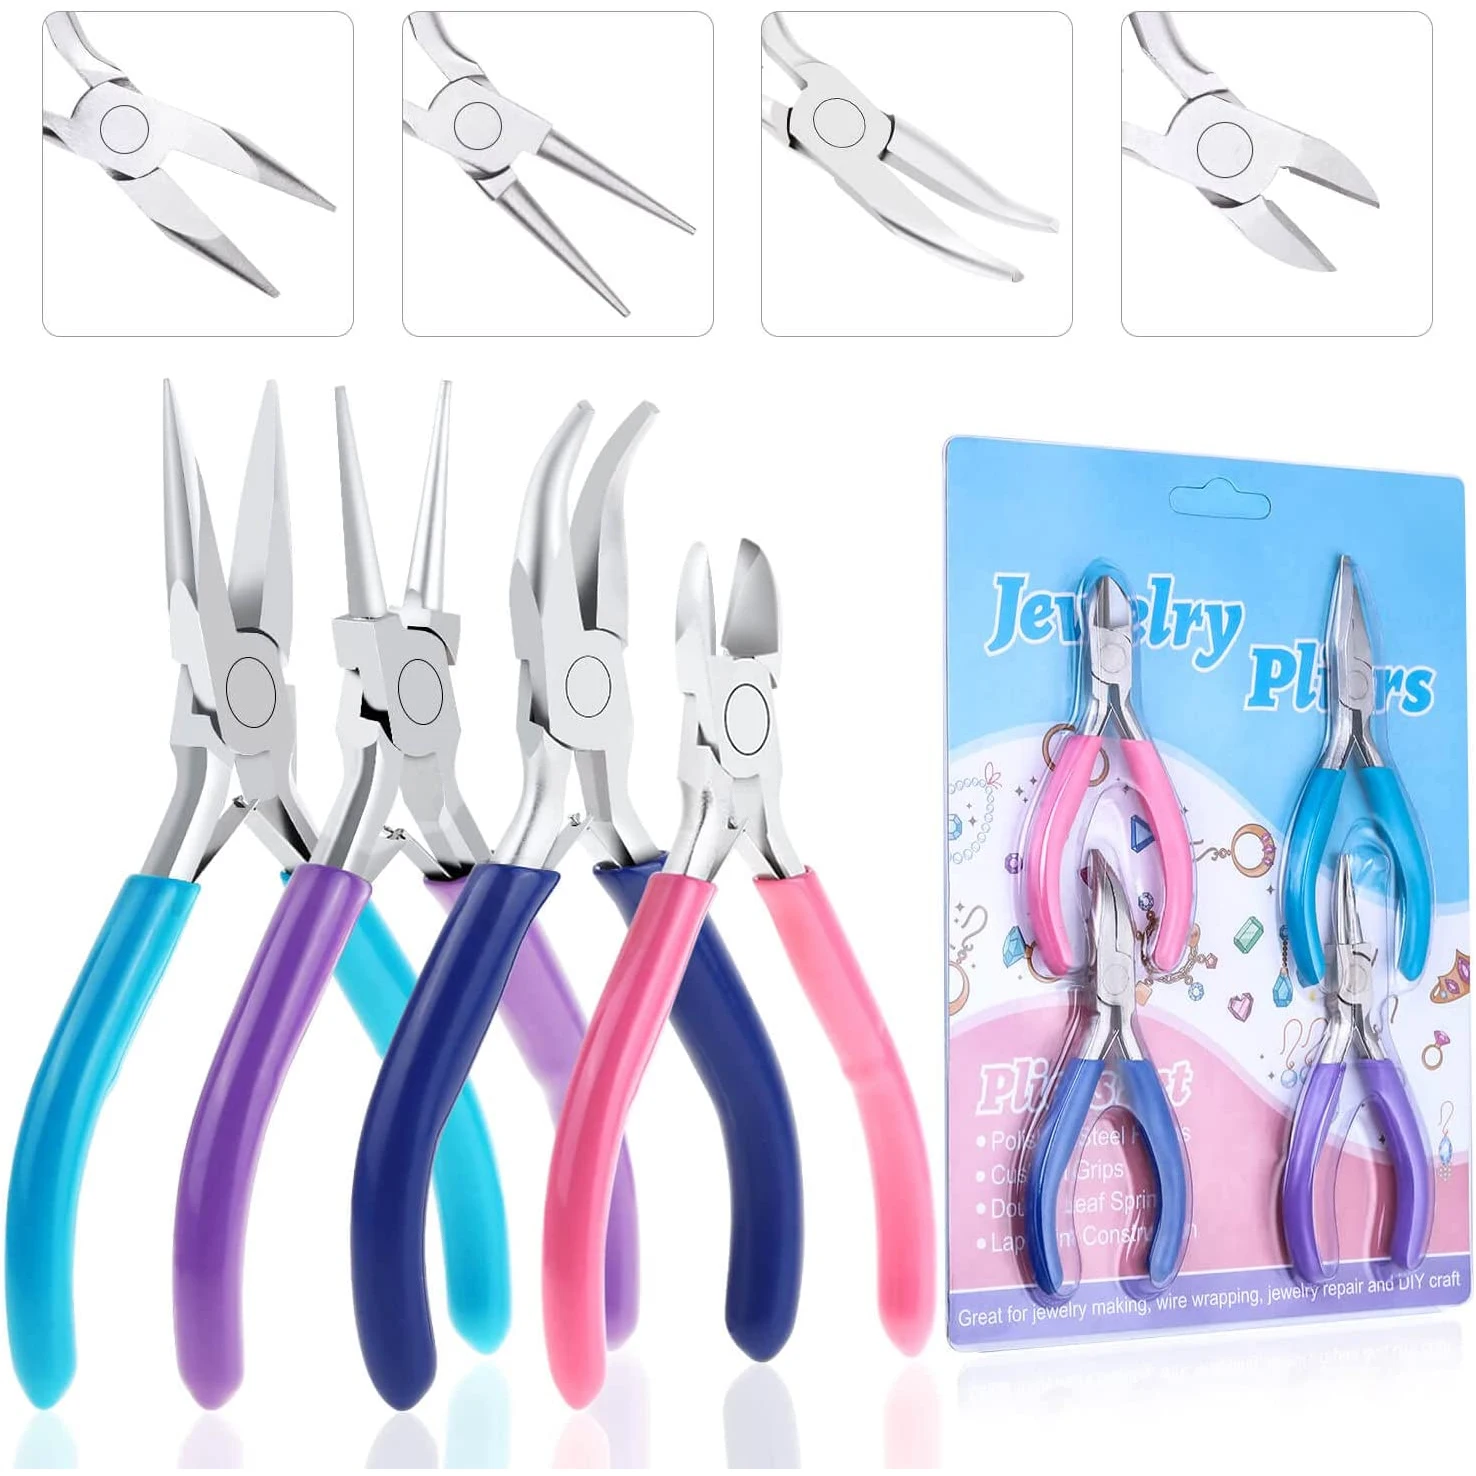 4pcs jewelry pliers tool set includes